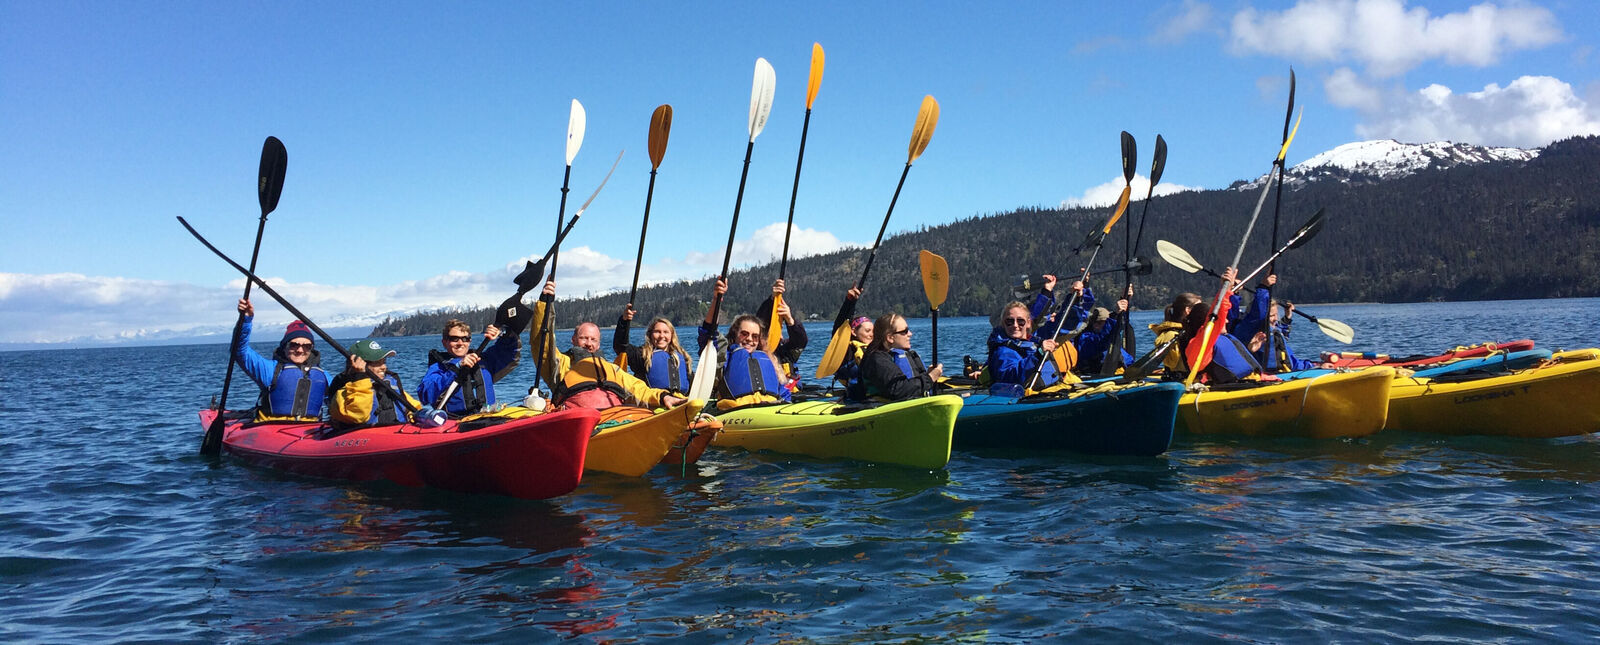 A group of students and faculty raise their paddles into the air as they kayak in Alaska